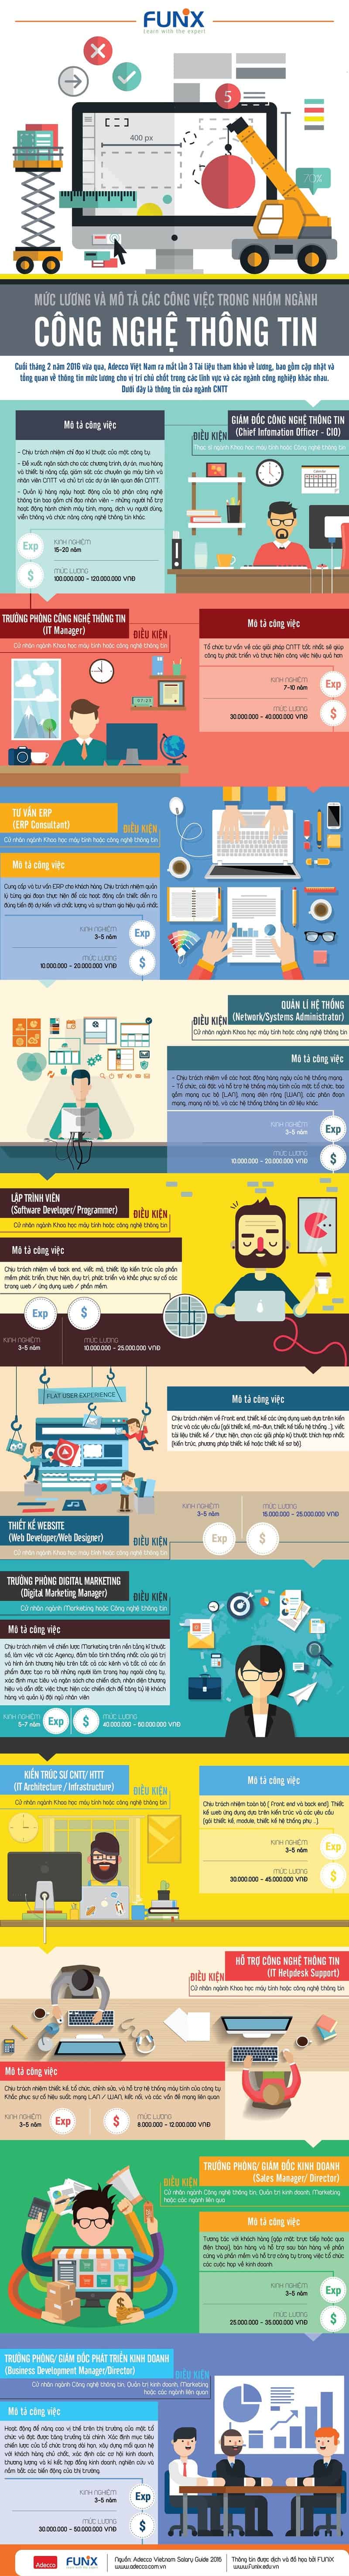 Infographic_Luong_IT